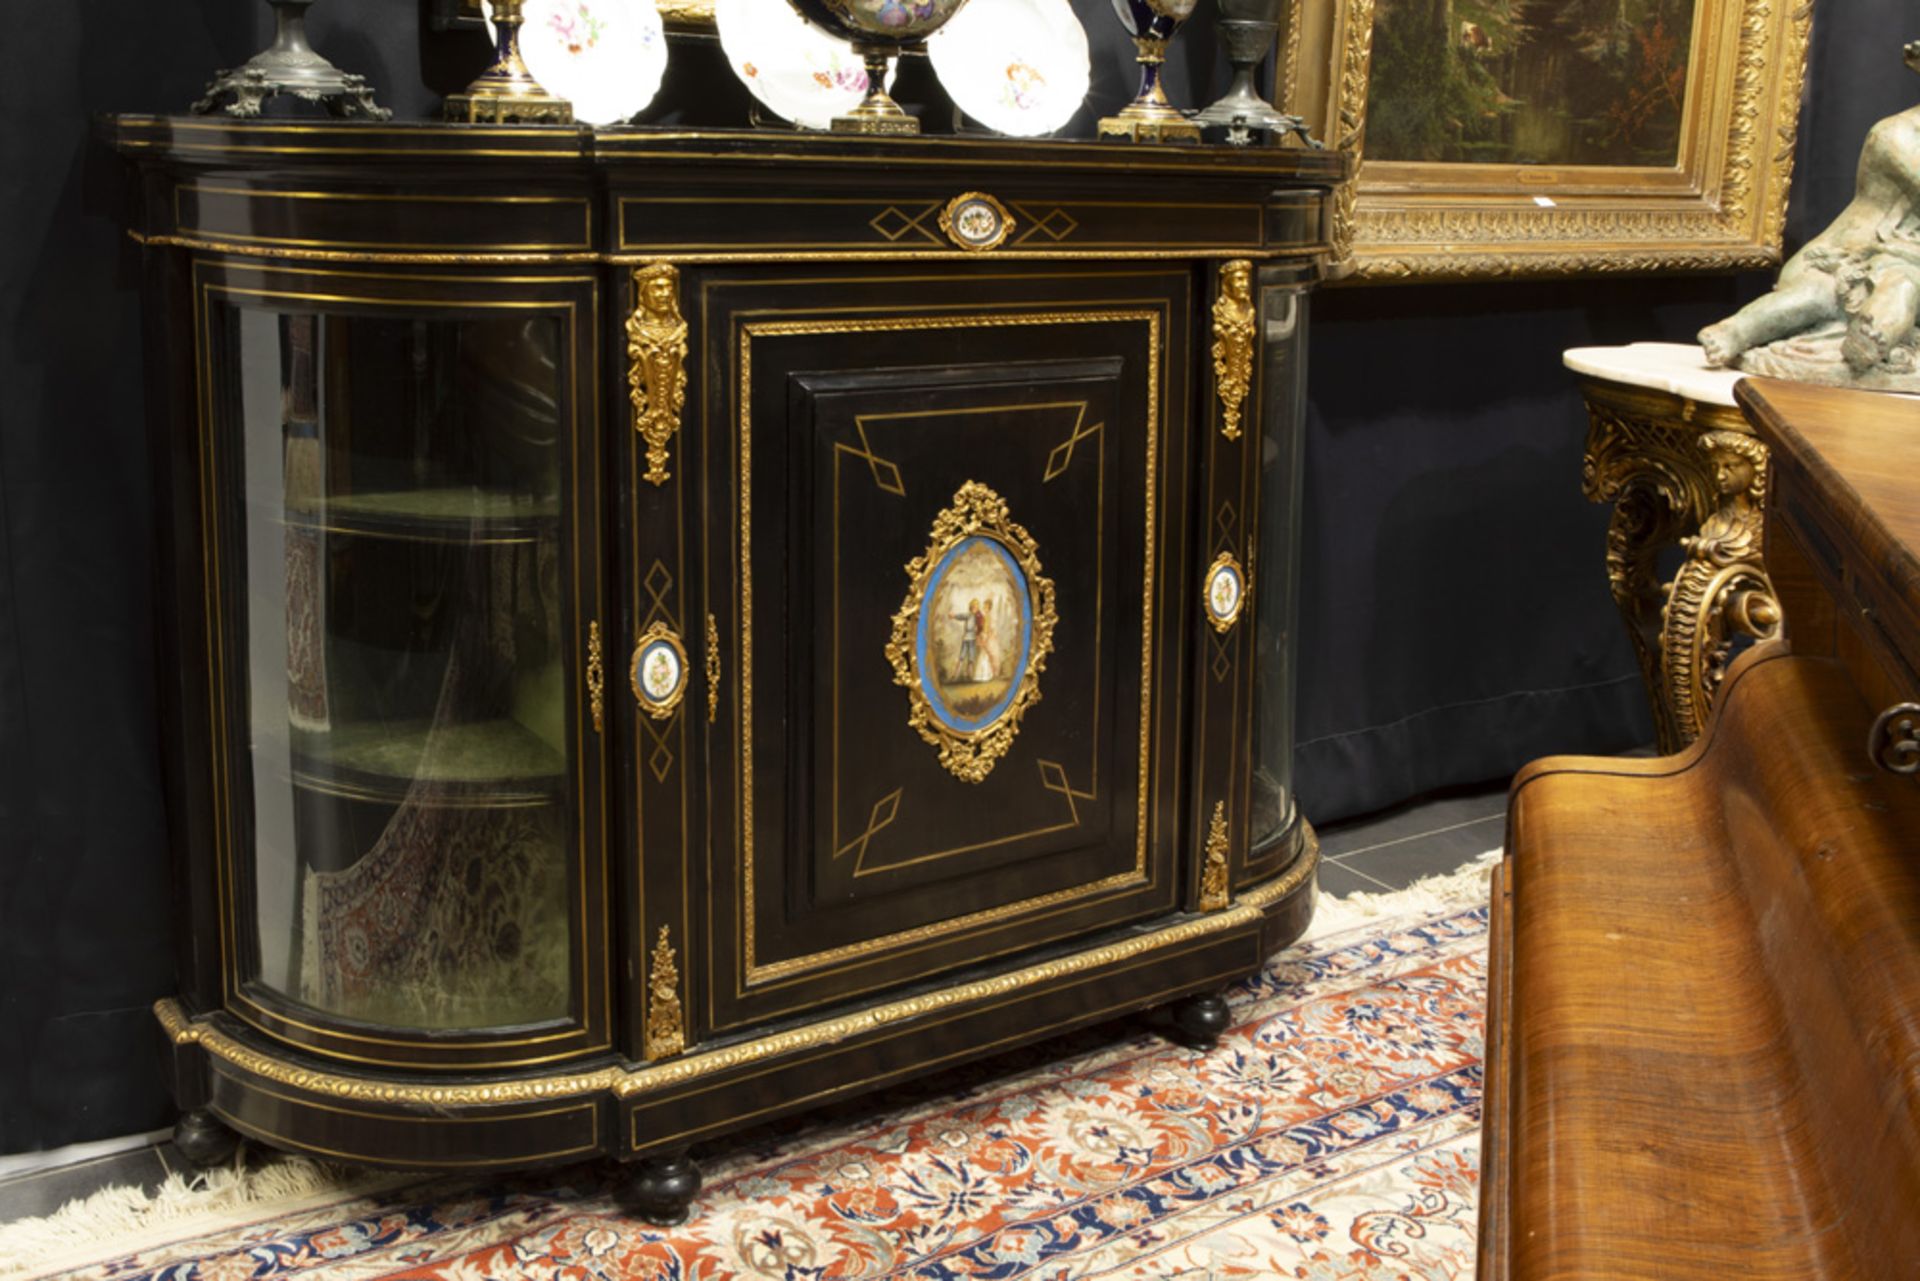 19th Cent. French neoclassical Napoleon III-sideboard in ebony and ebonised wood with mountings in